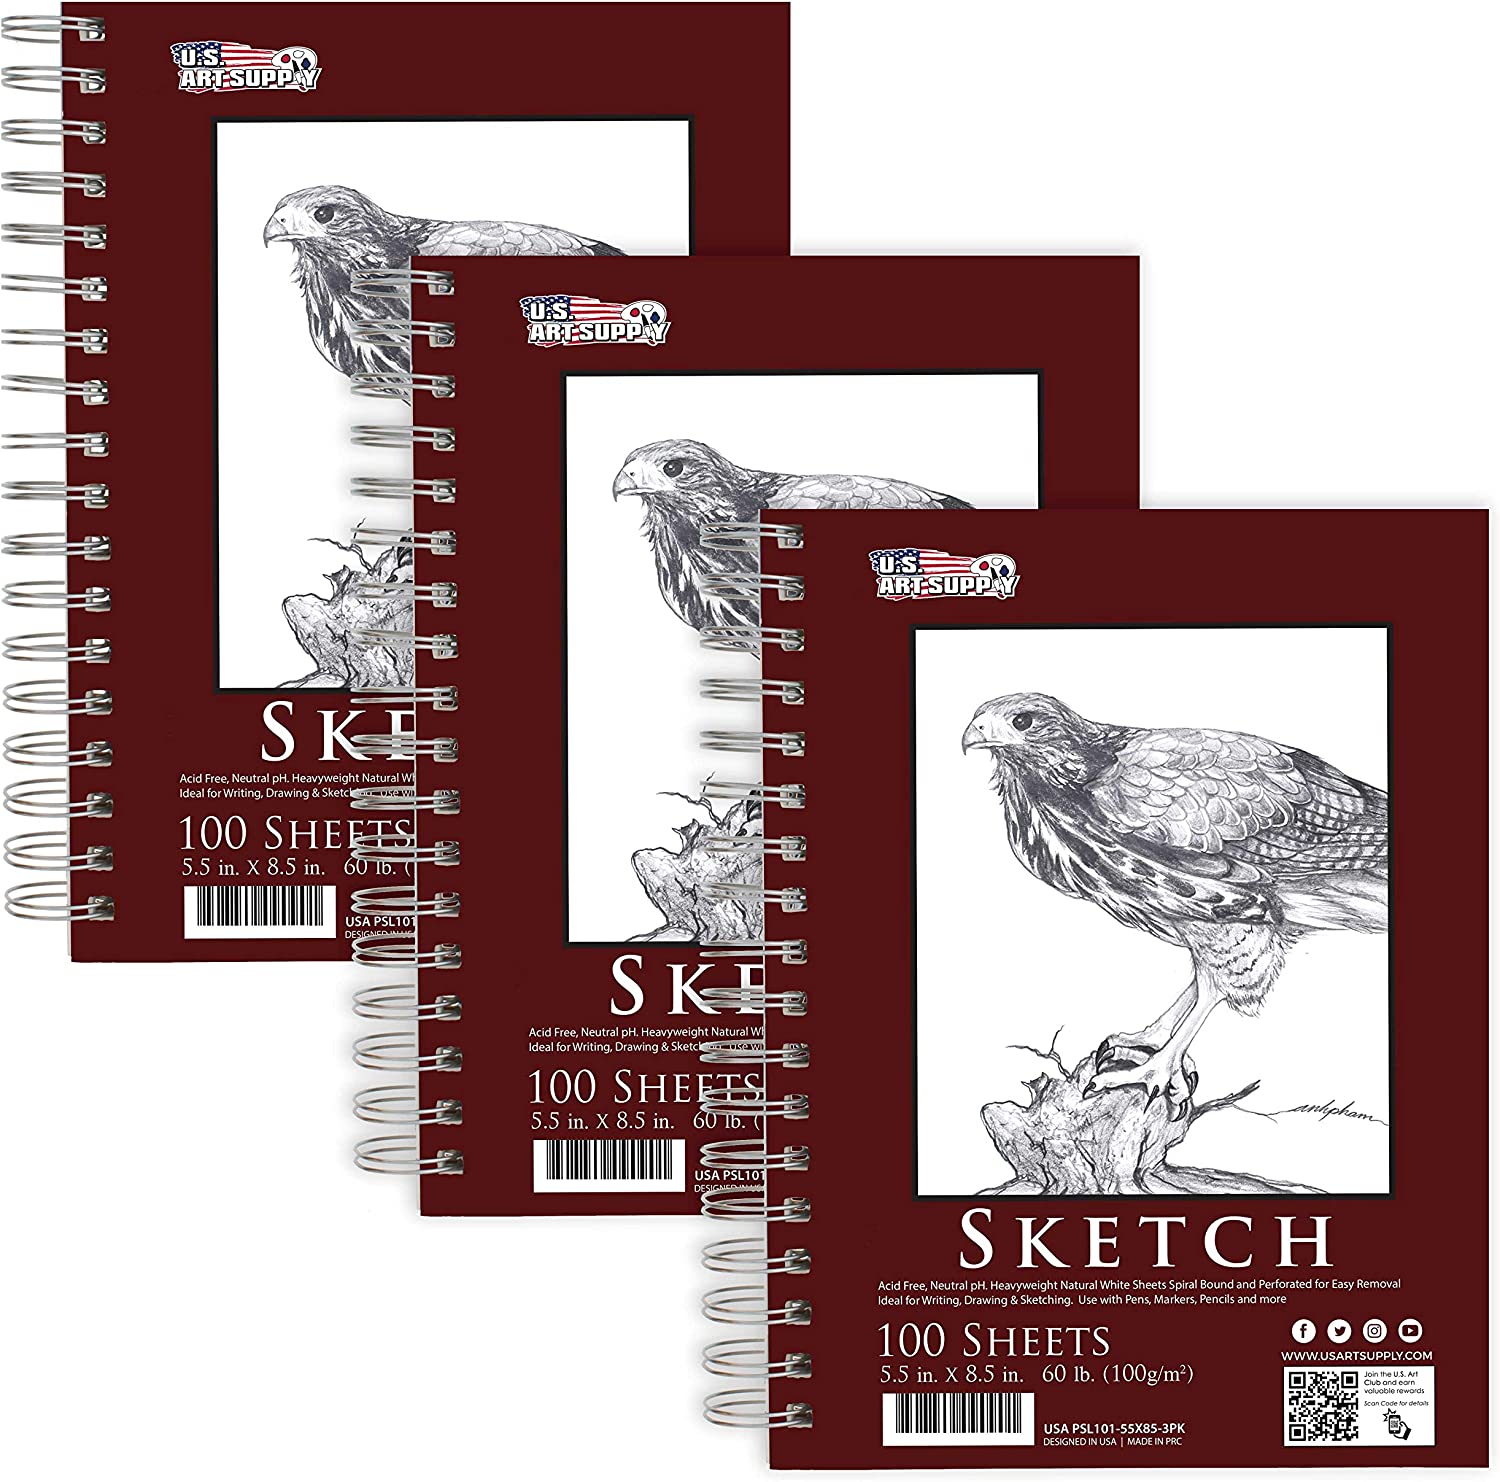 78-pack Drawing Set Sketching Kit, Pro Art Supplies With 75 Sheets 3-color  Sketch Pad, Coloring Book, Colored, Graphite, Charcoal, Metallic 